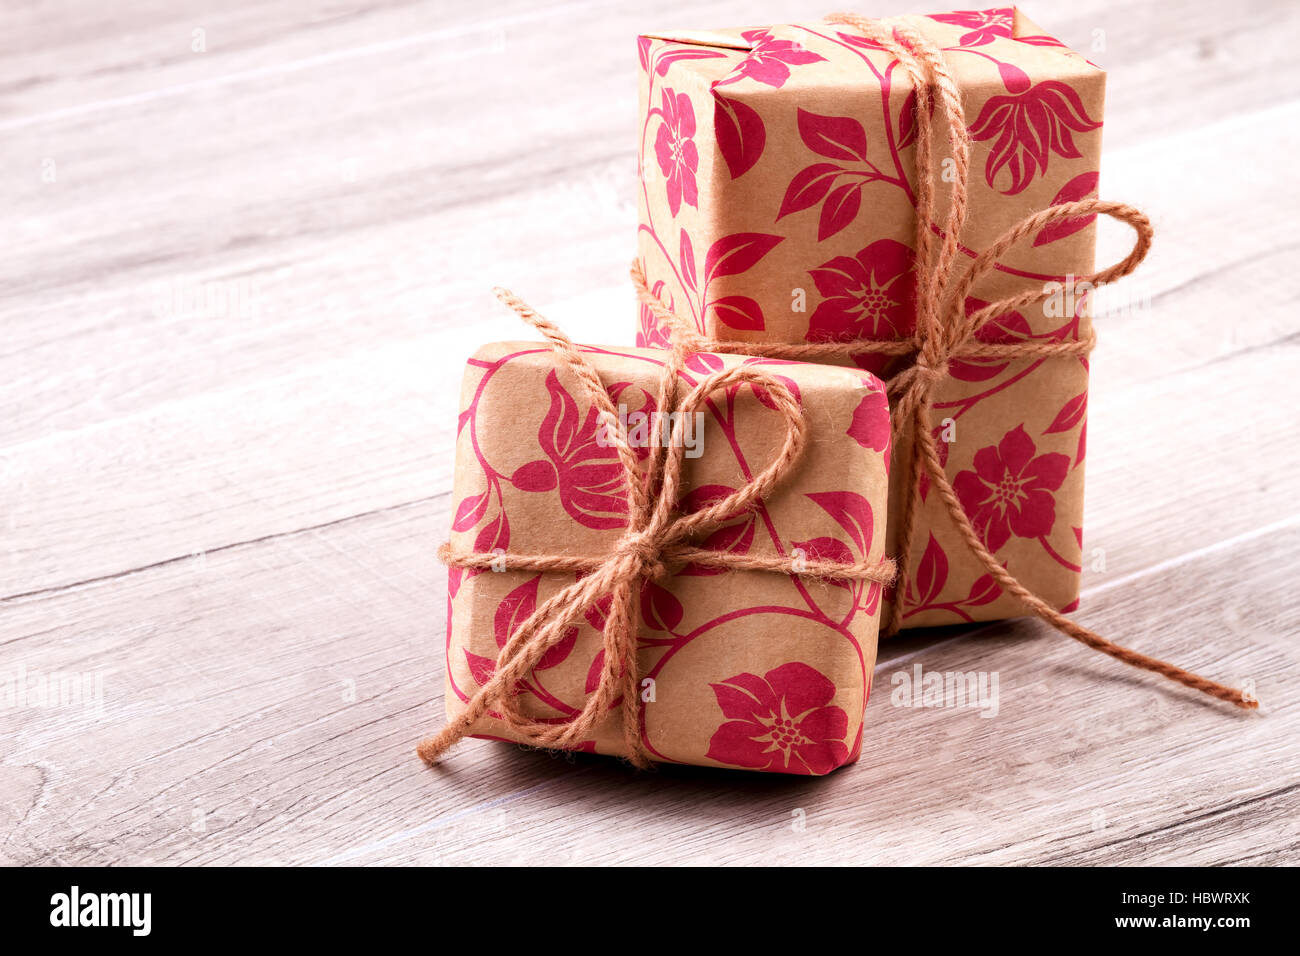 Boxes wrapped in gift paper. Stock Photo